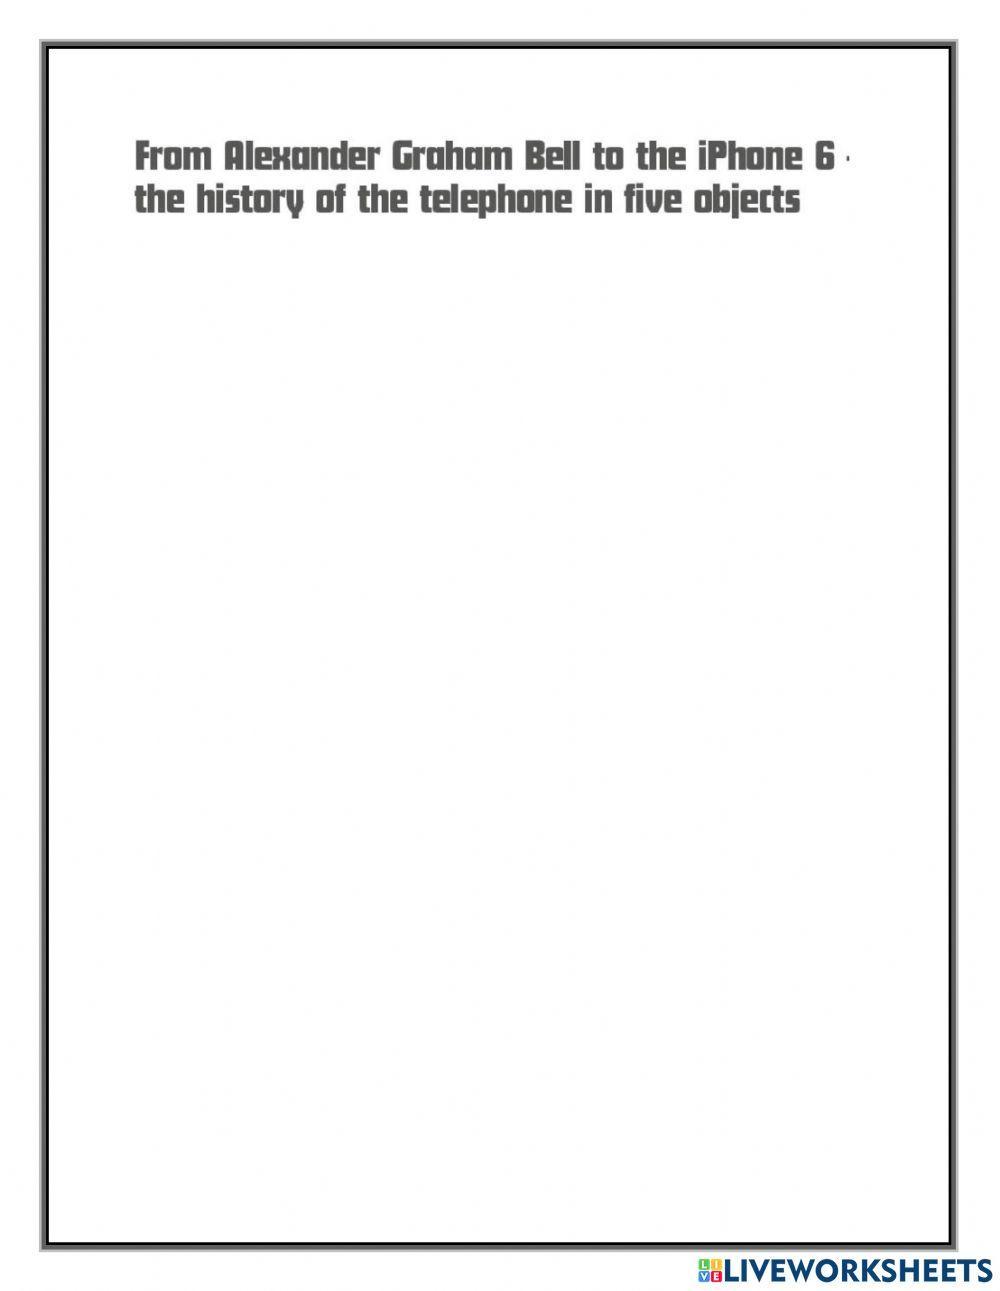 The history of the telephone in five obejcts